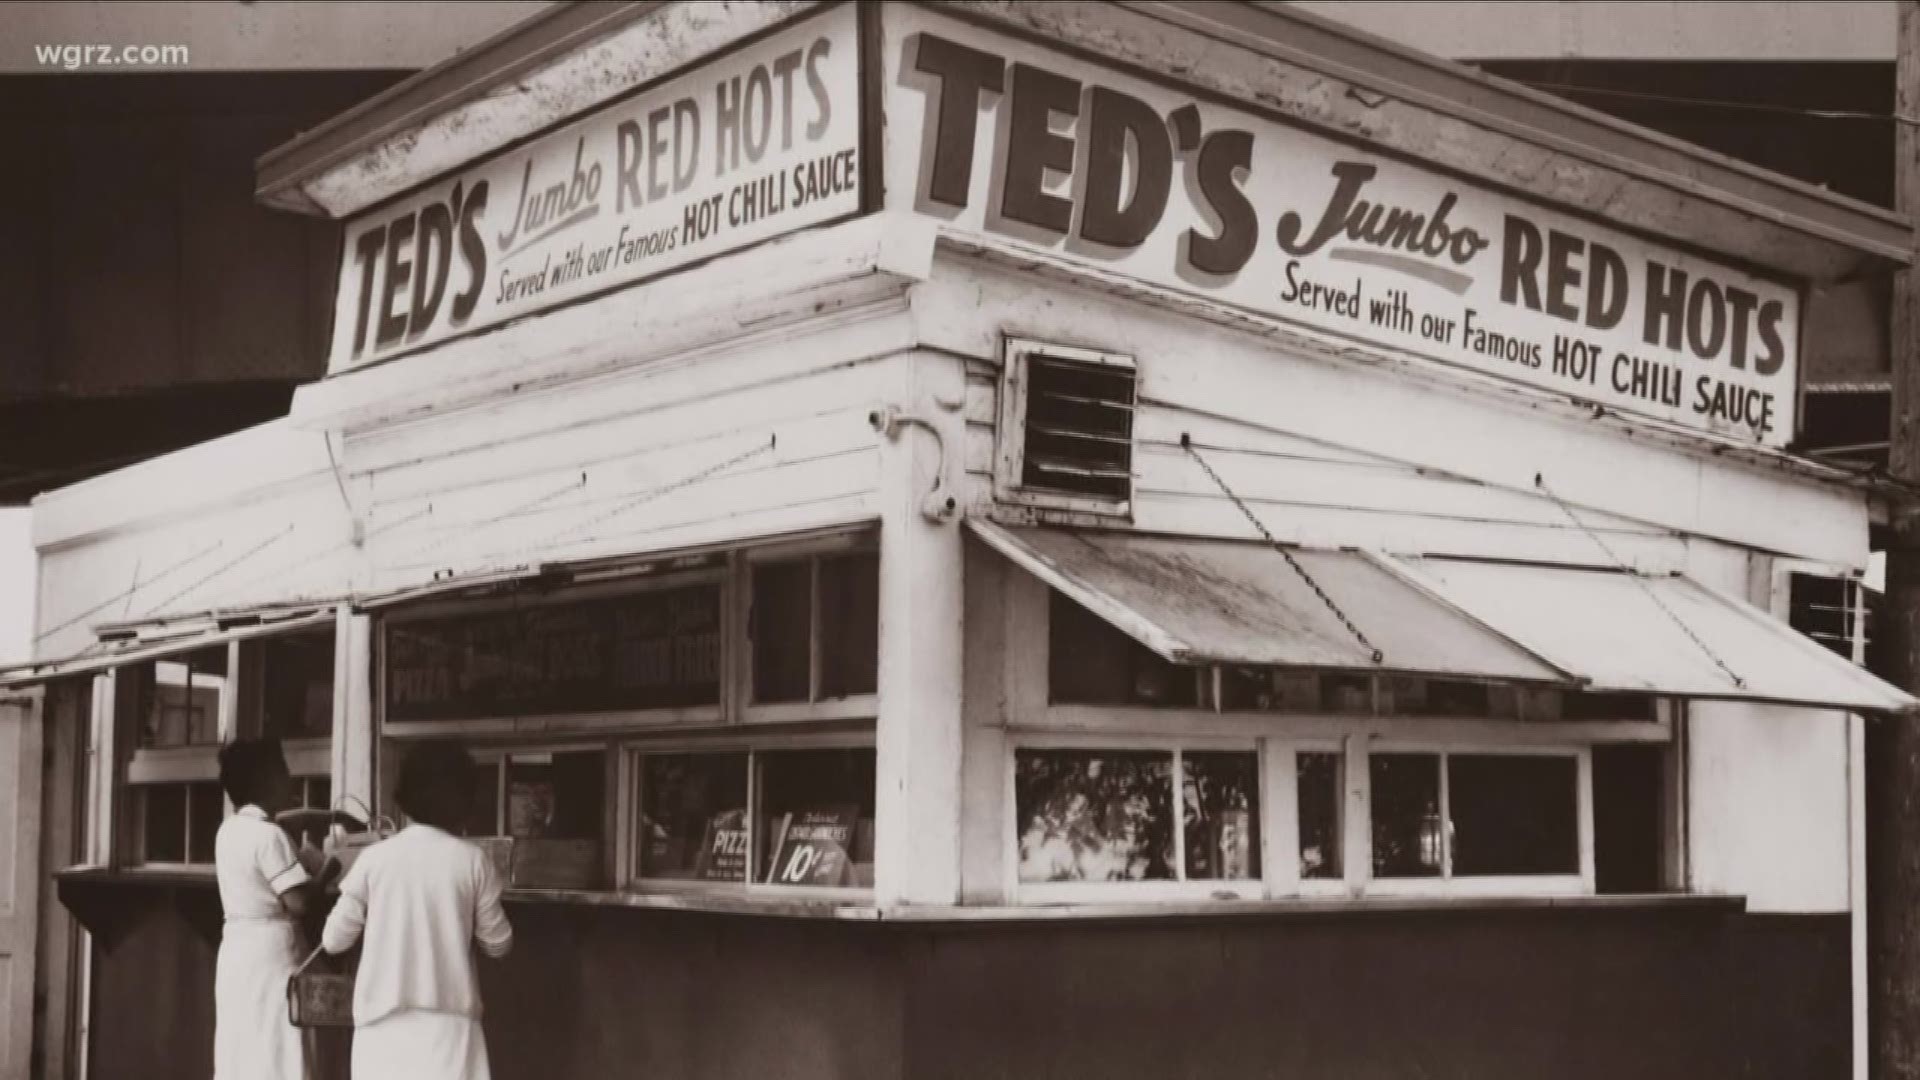 The Unknown Story of the connection between the beginnings of the Peace Bridge and Ted's Hotdogs